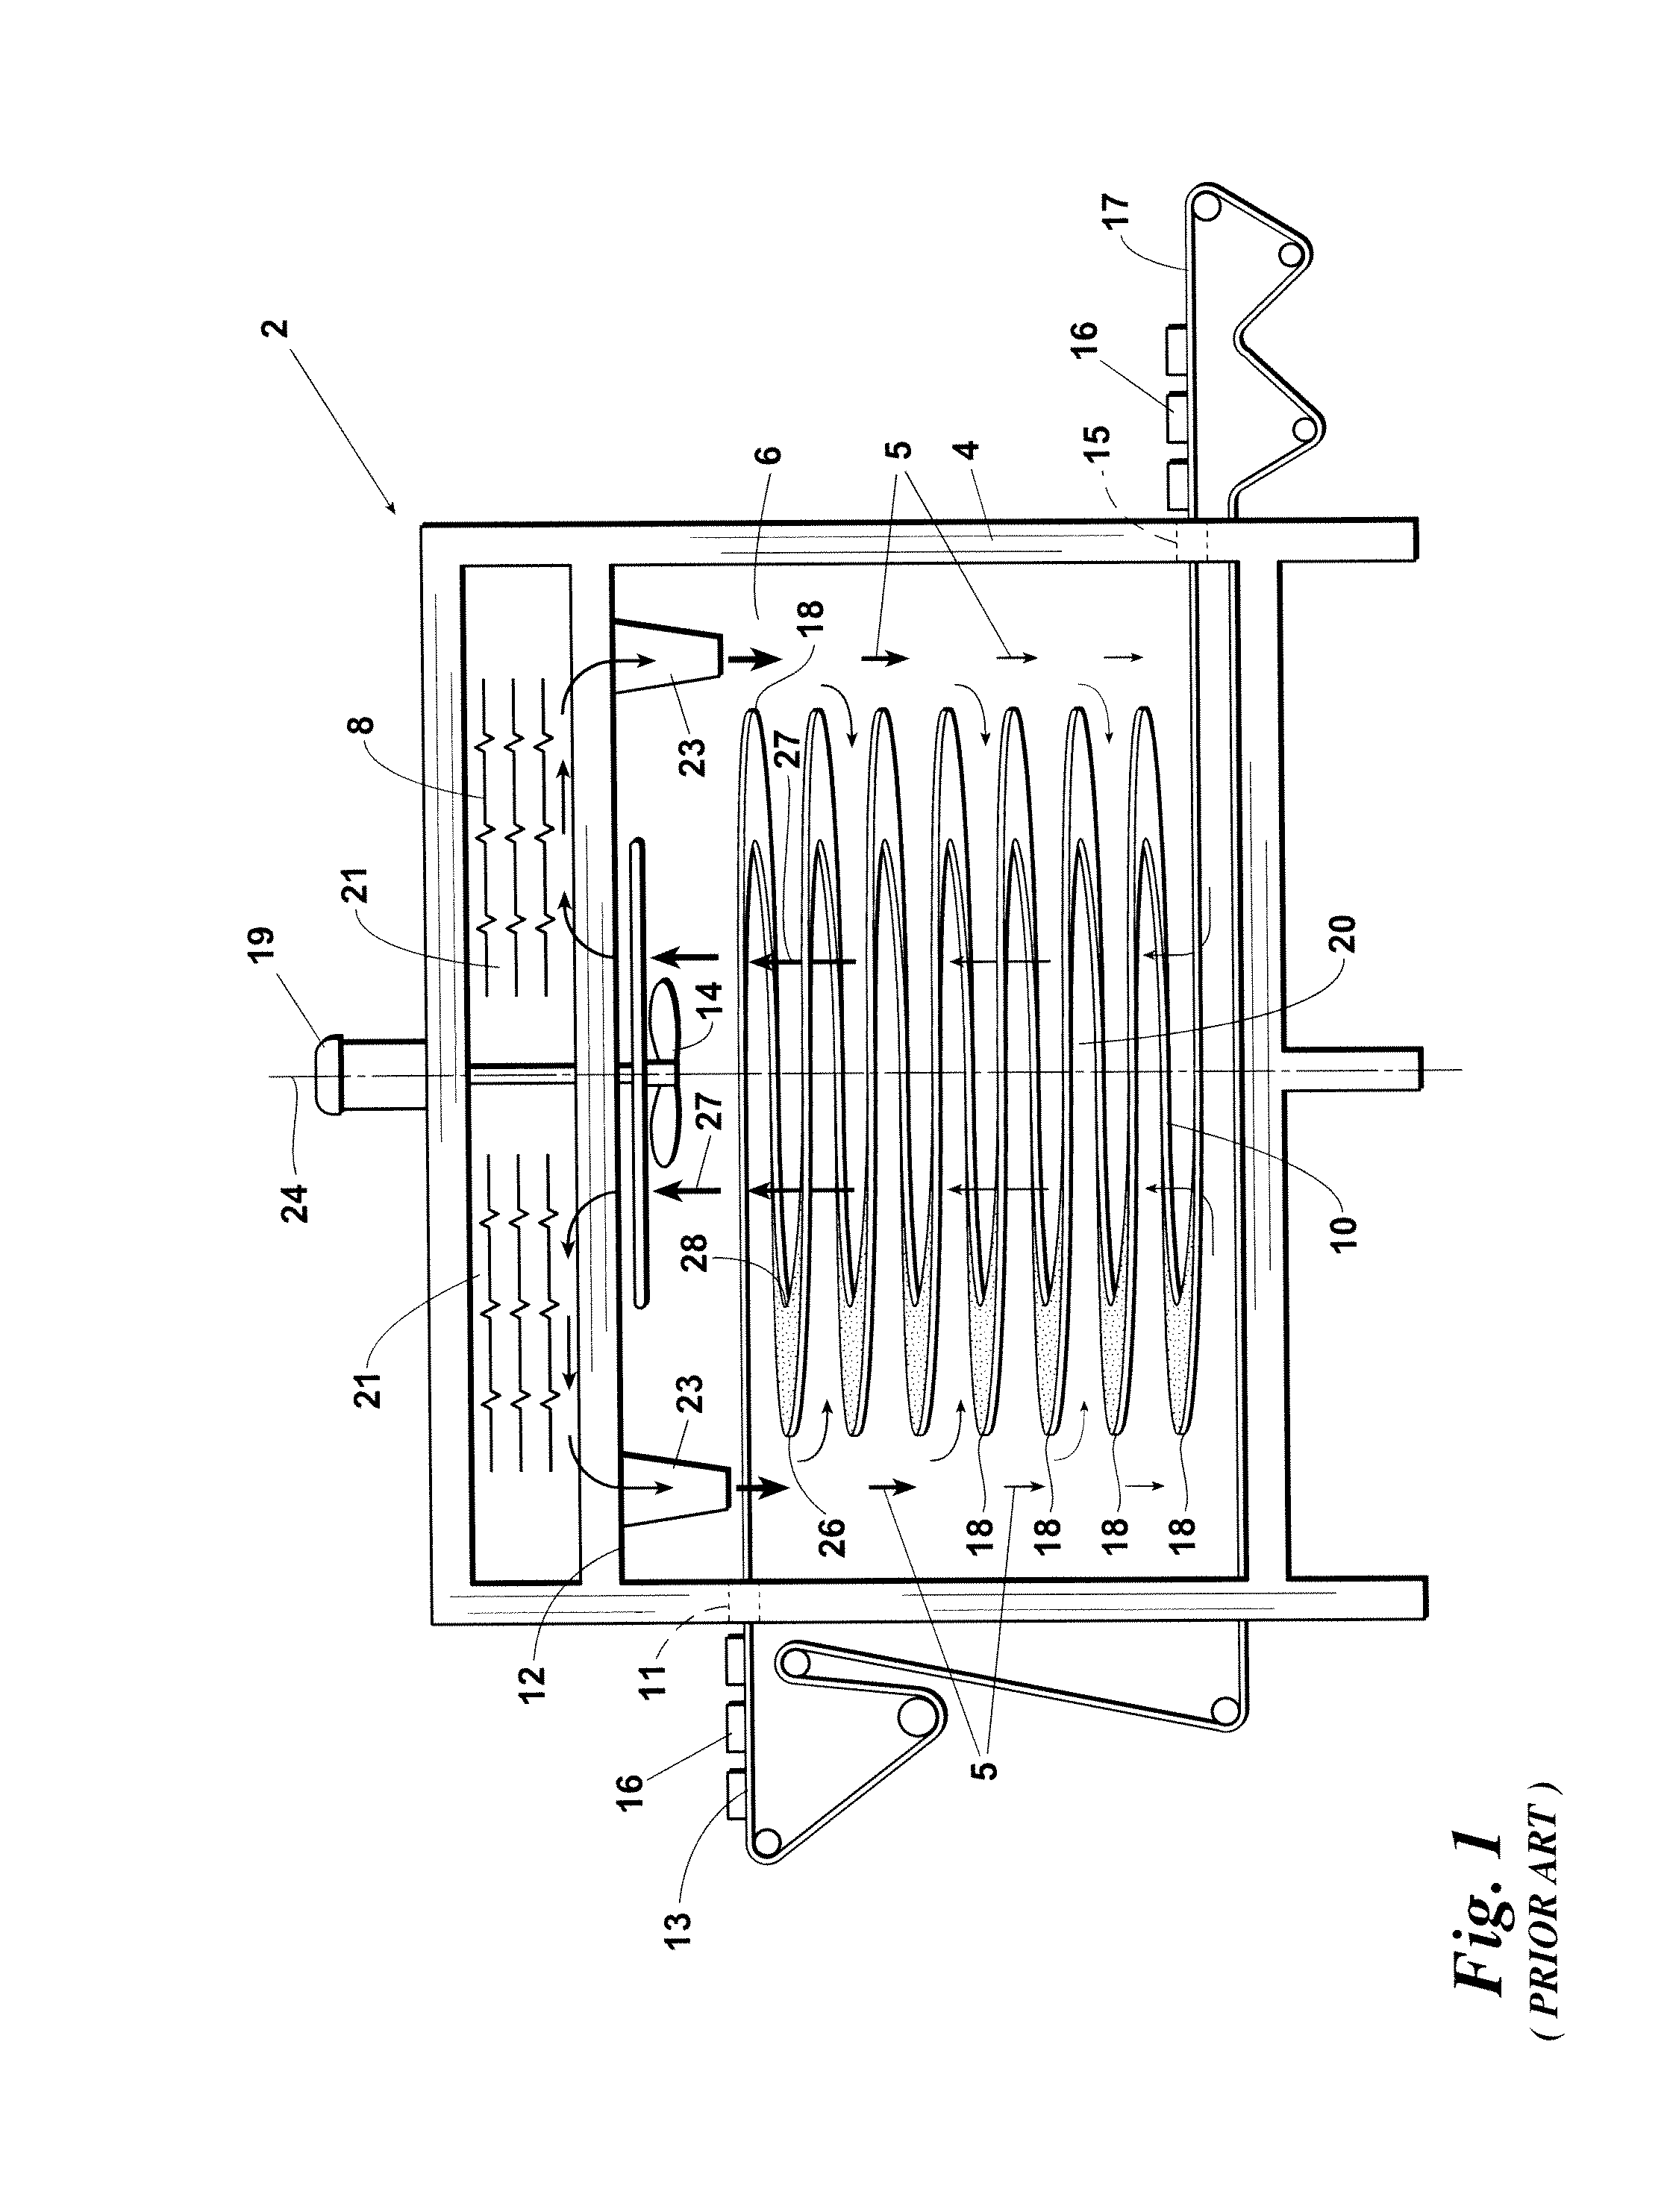 Spiral oven apparatus and method of cooking